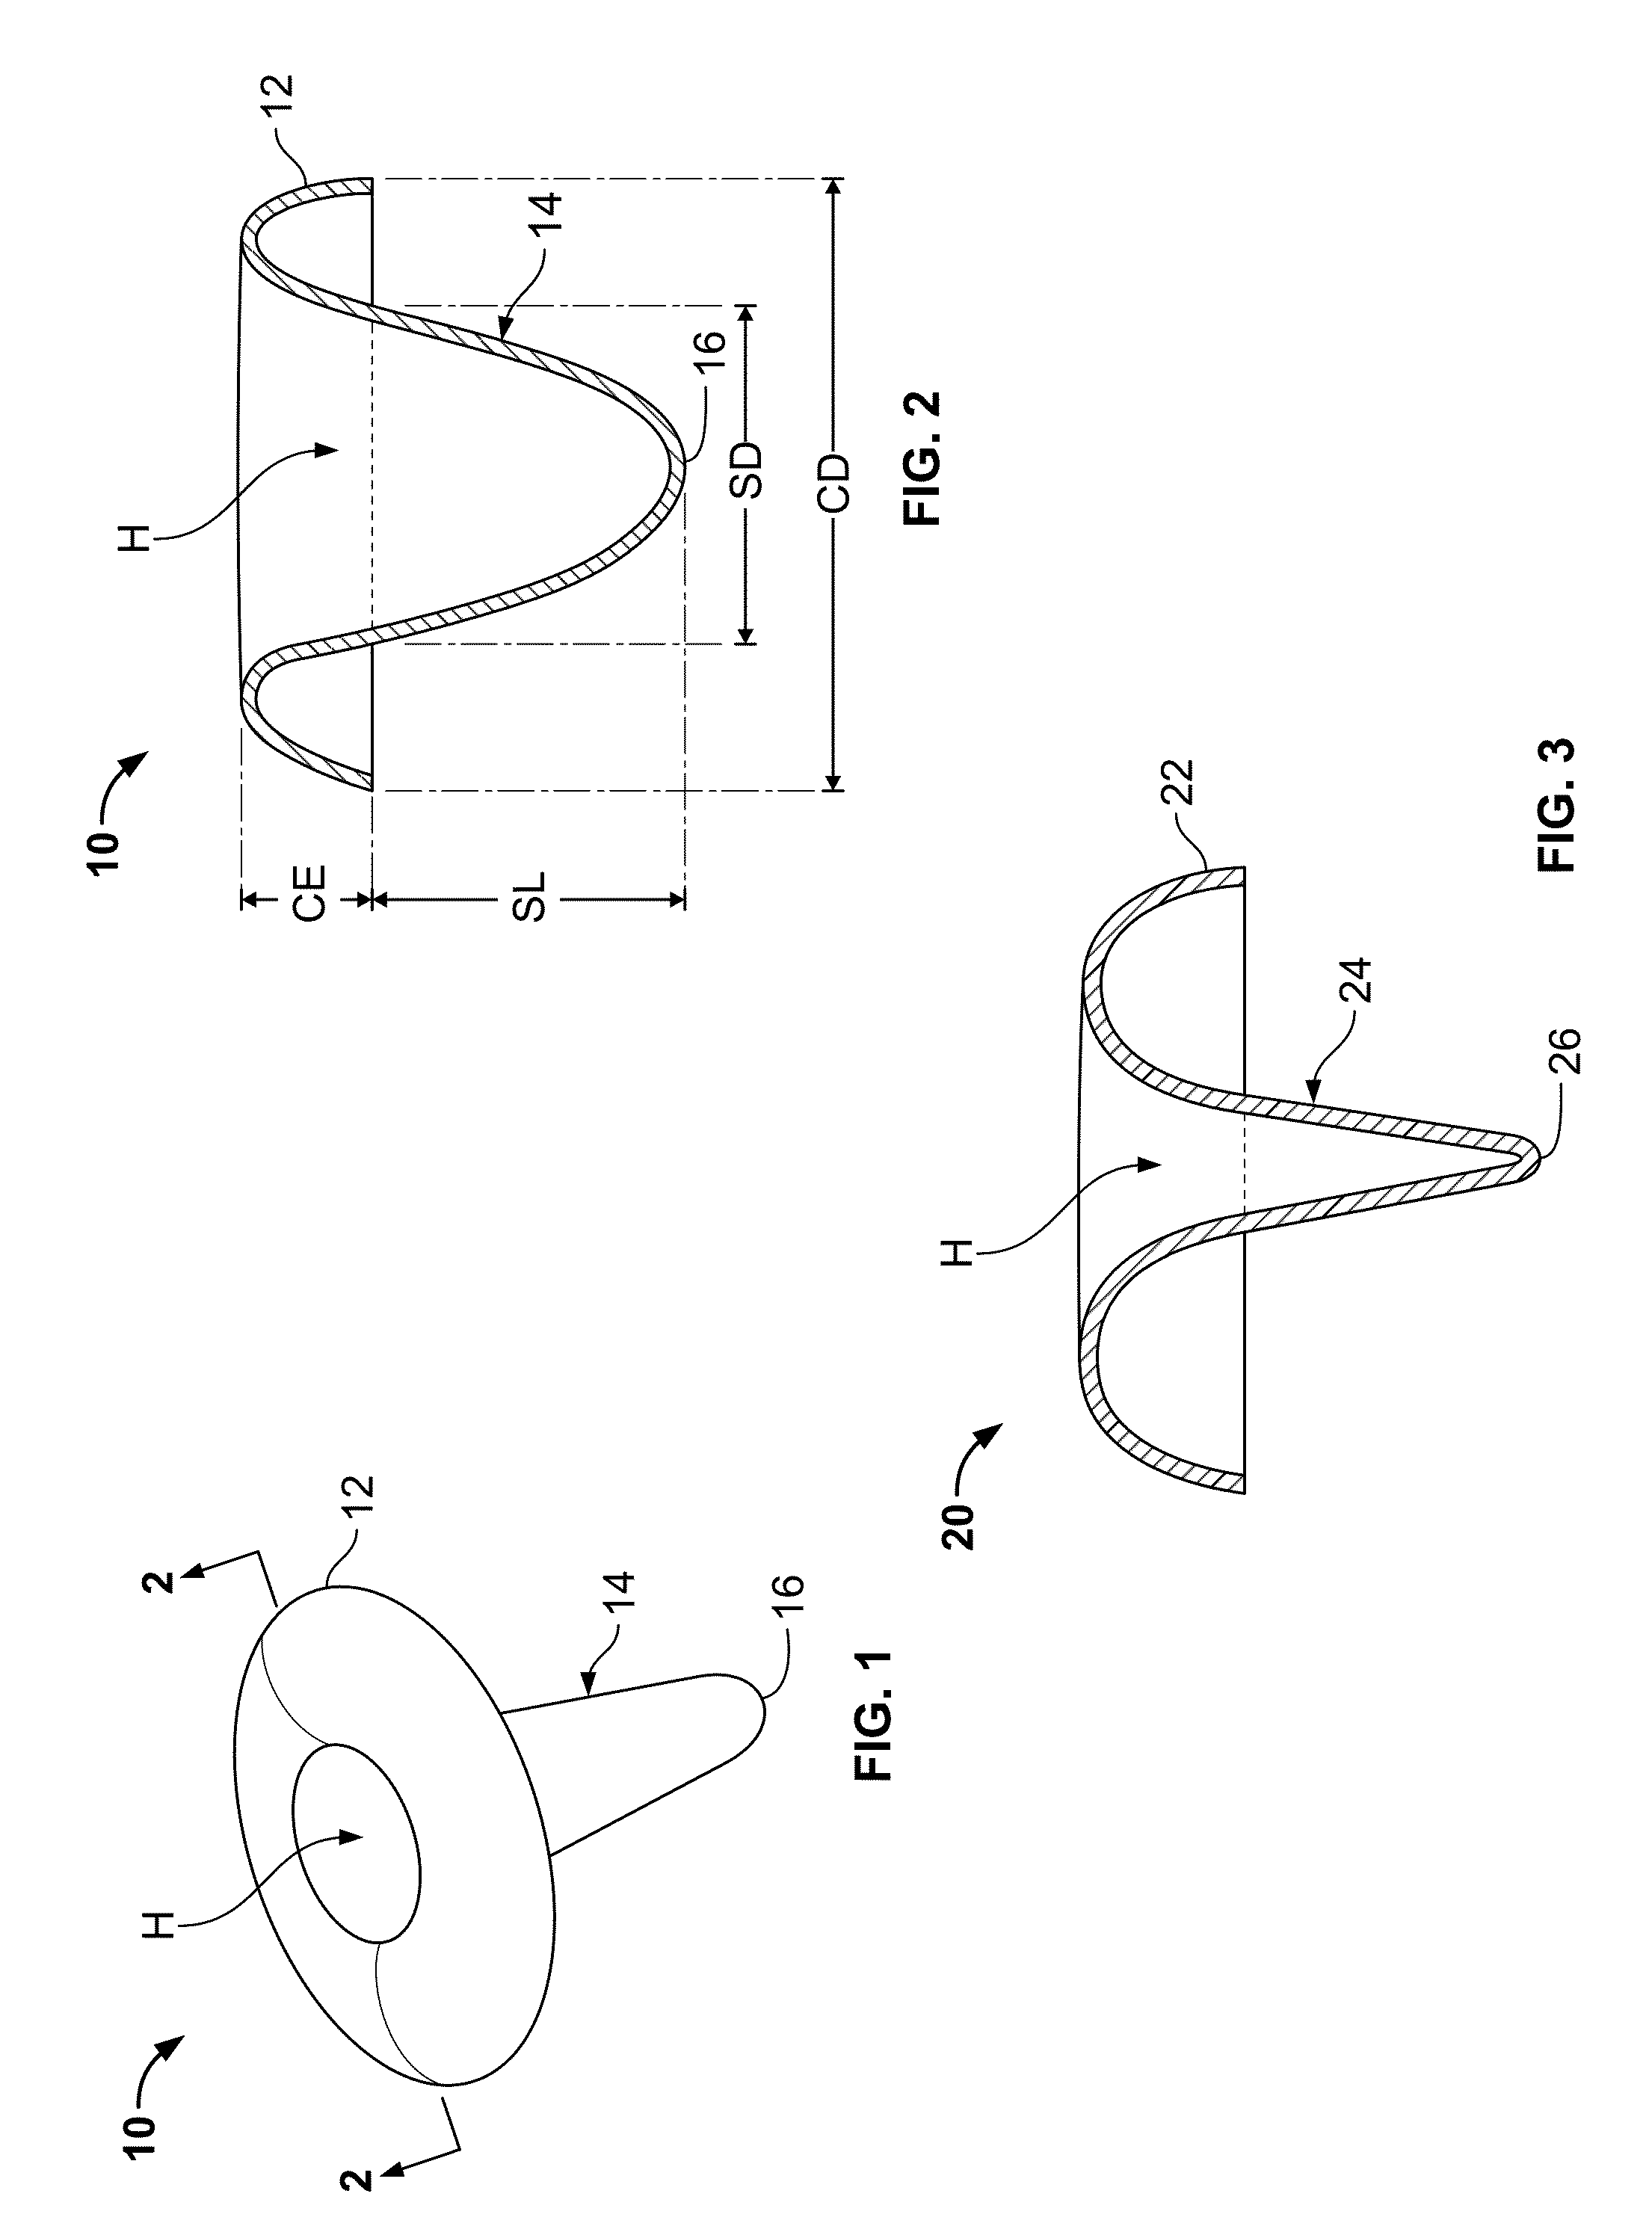 Resistance welding fastener, apparatus and methods for joining similar and dissimilar materials